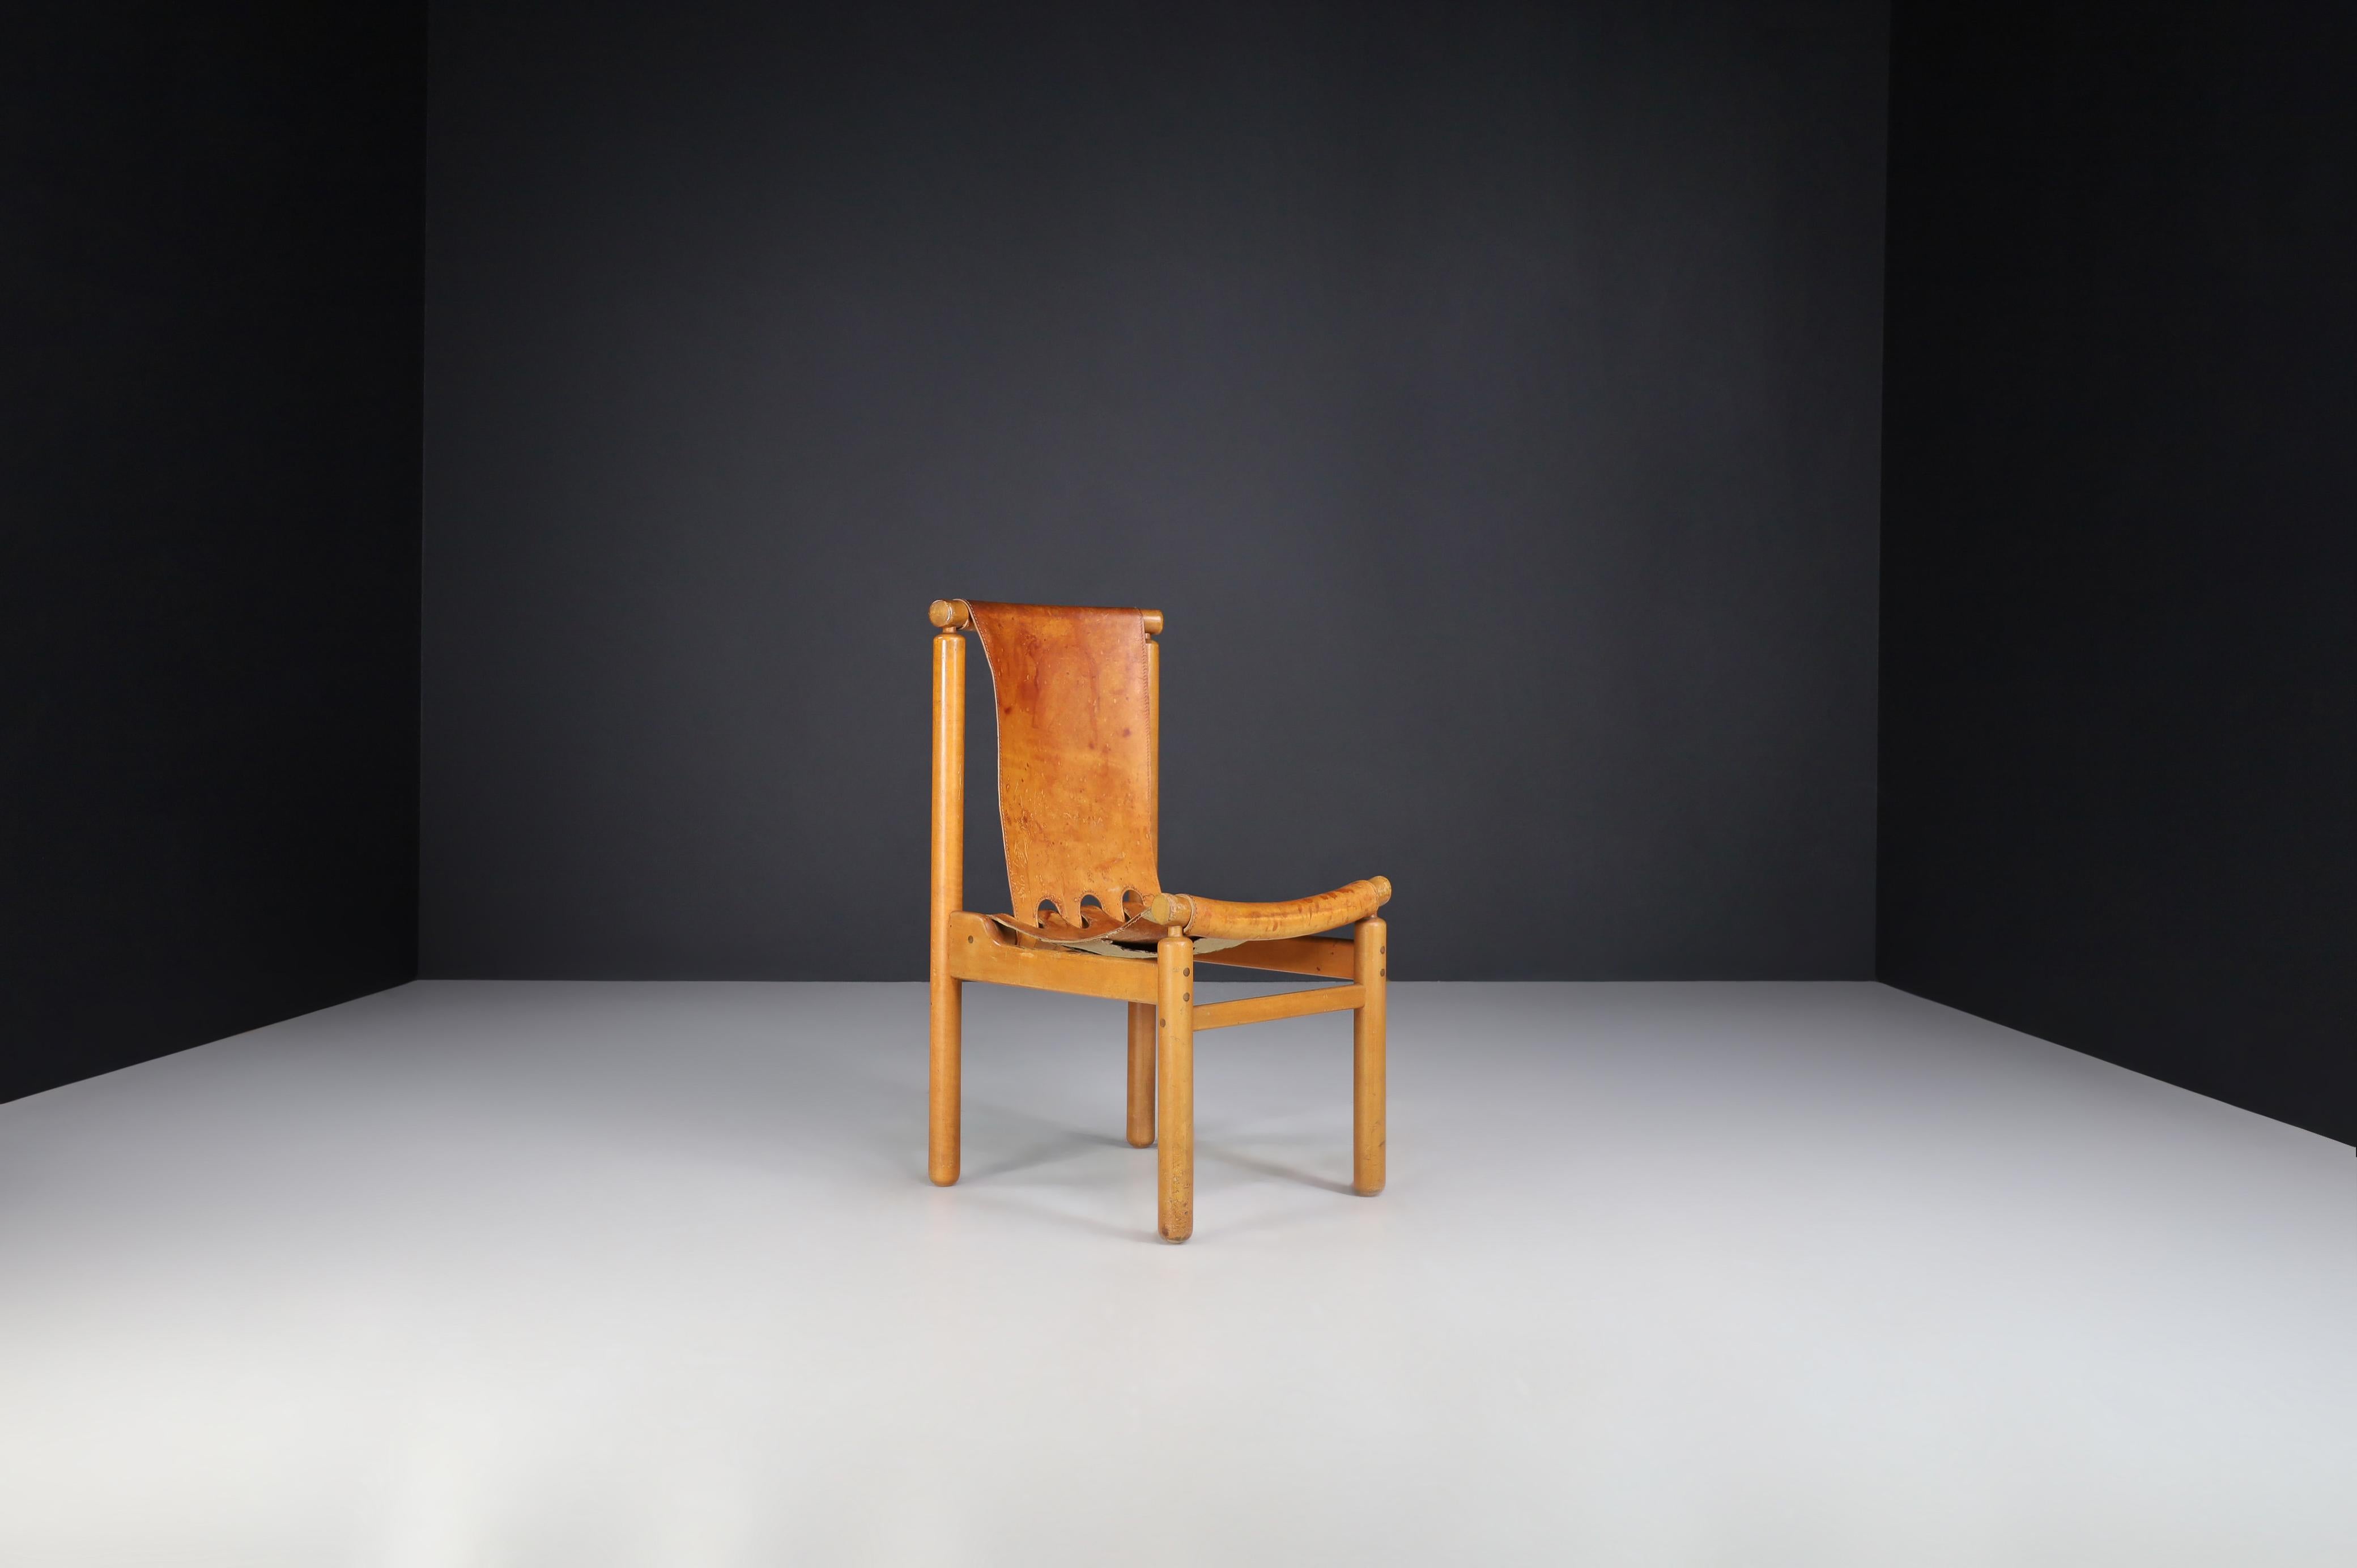 Leather Ilmari Tapiovaara Dining Chairs, Finland, the 1960s For Sale